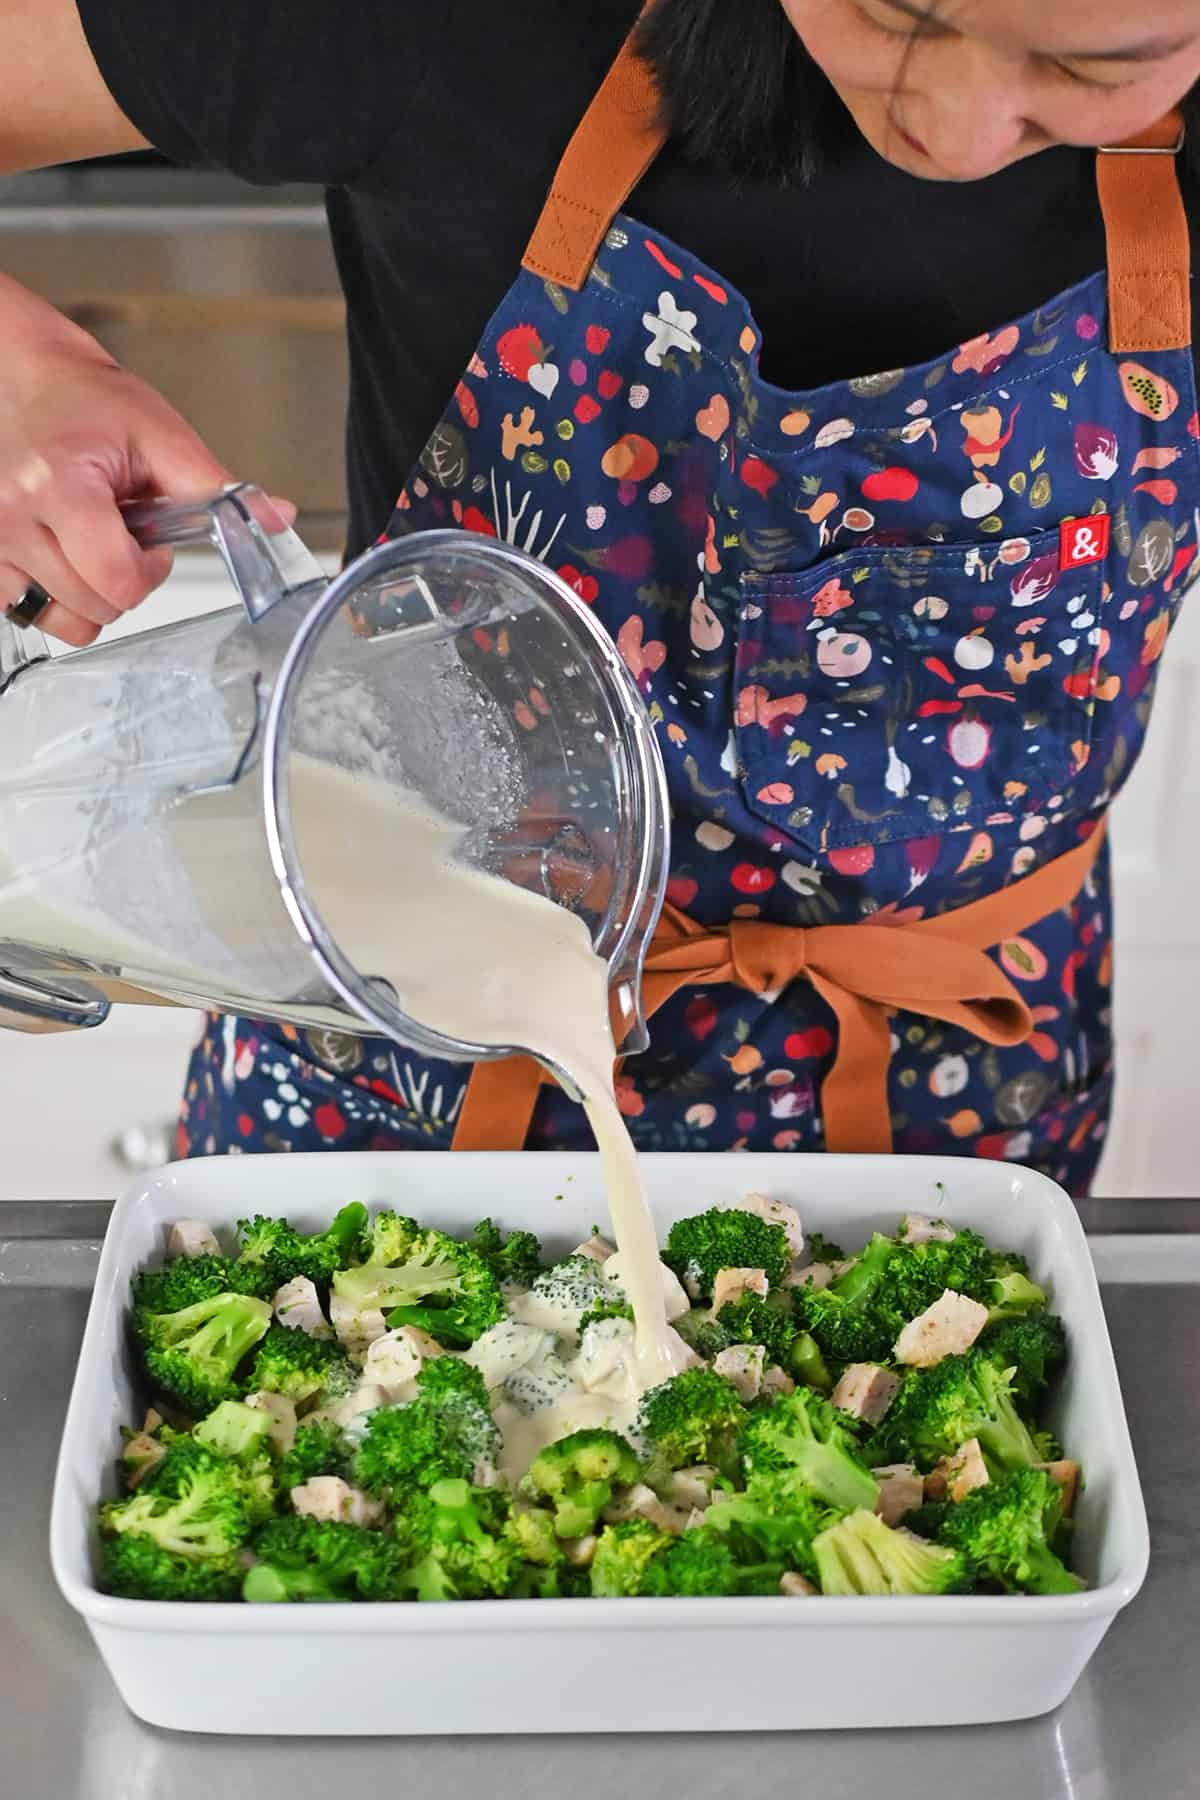 An Asian woman in a blue apron is pouring a white sauce from a blender onto broccoli and chicken in a white casserole pan.